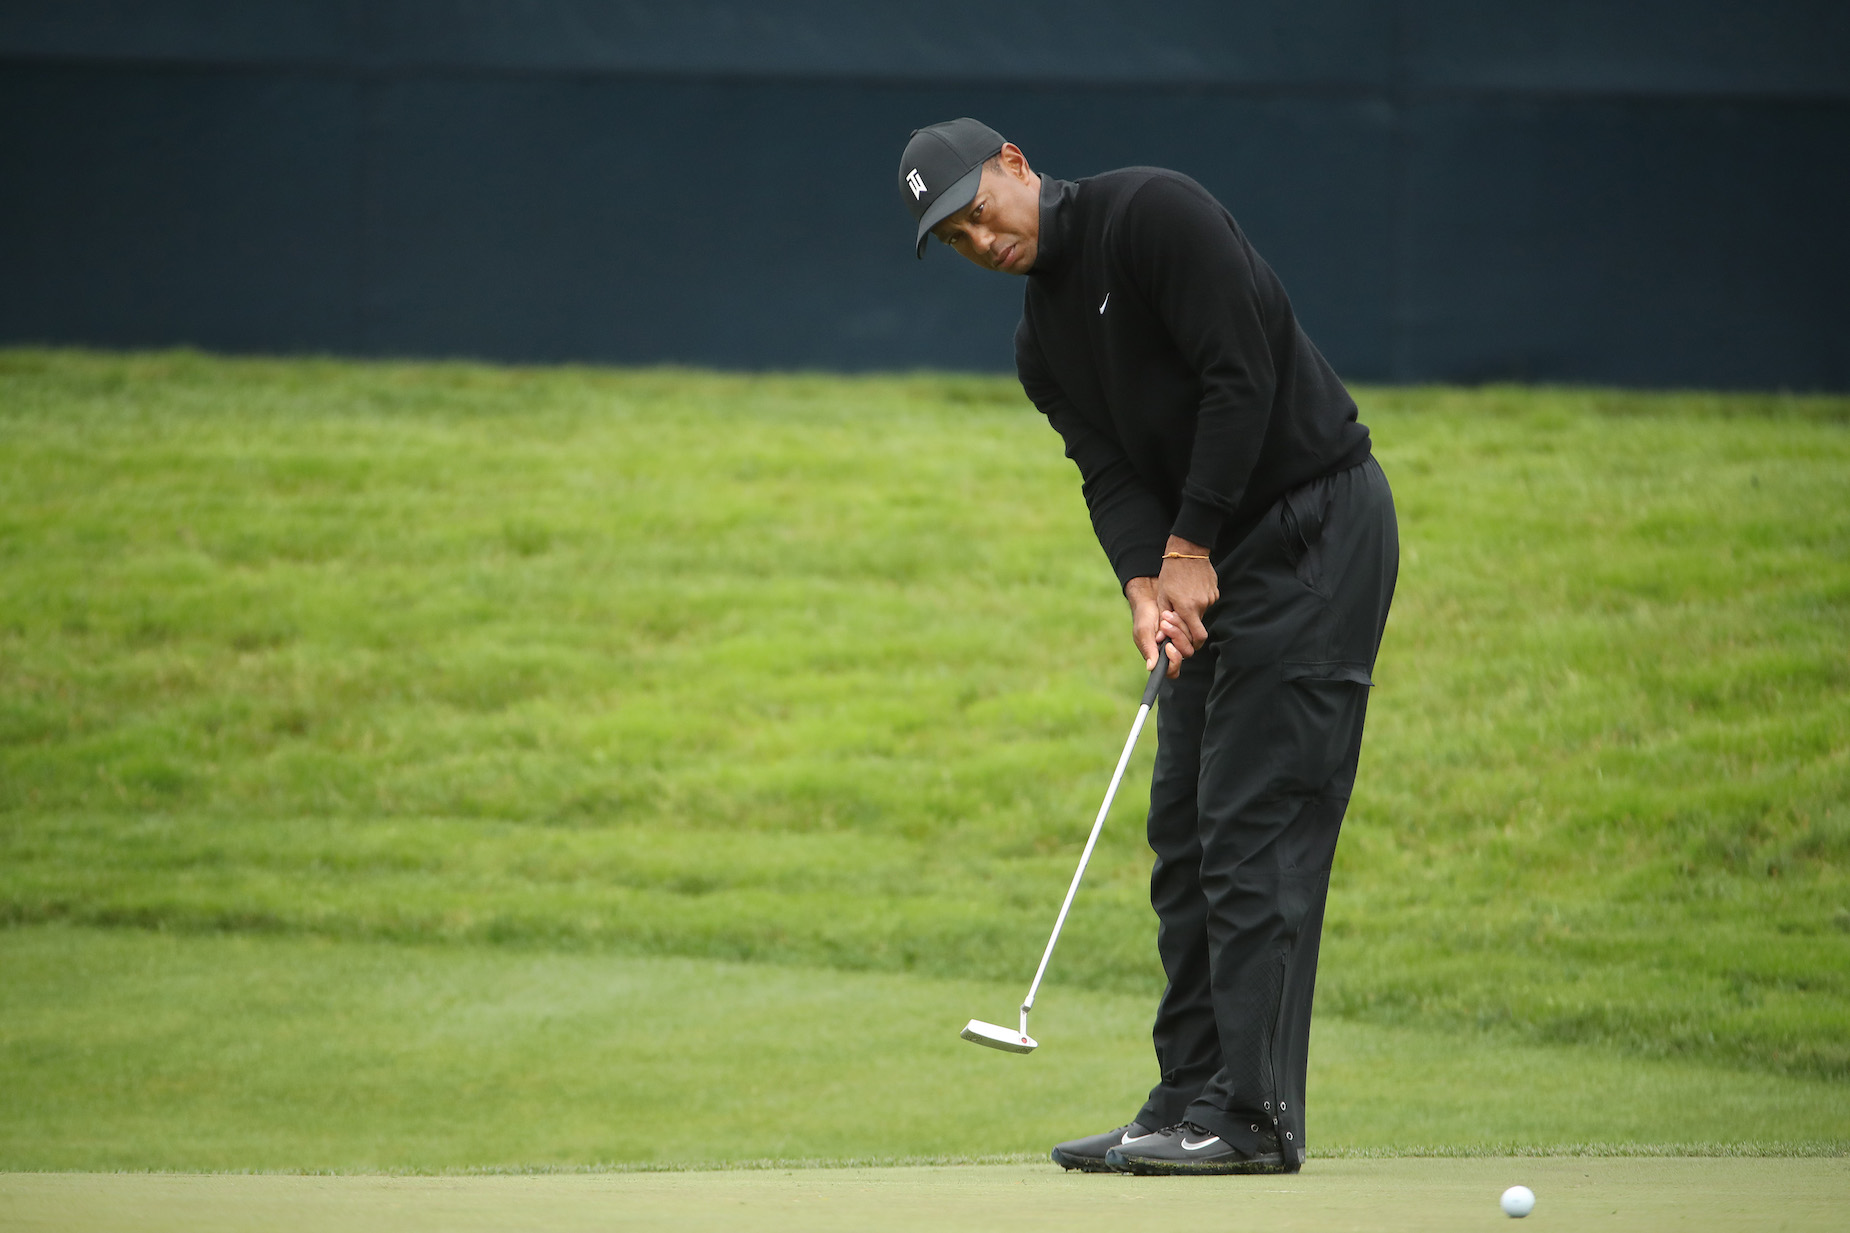 Tiger Woods will be hoping a new putter helps him at the 2020 PGA Championship.